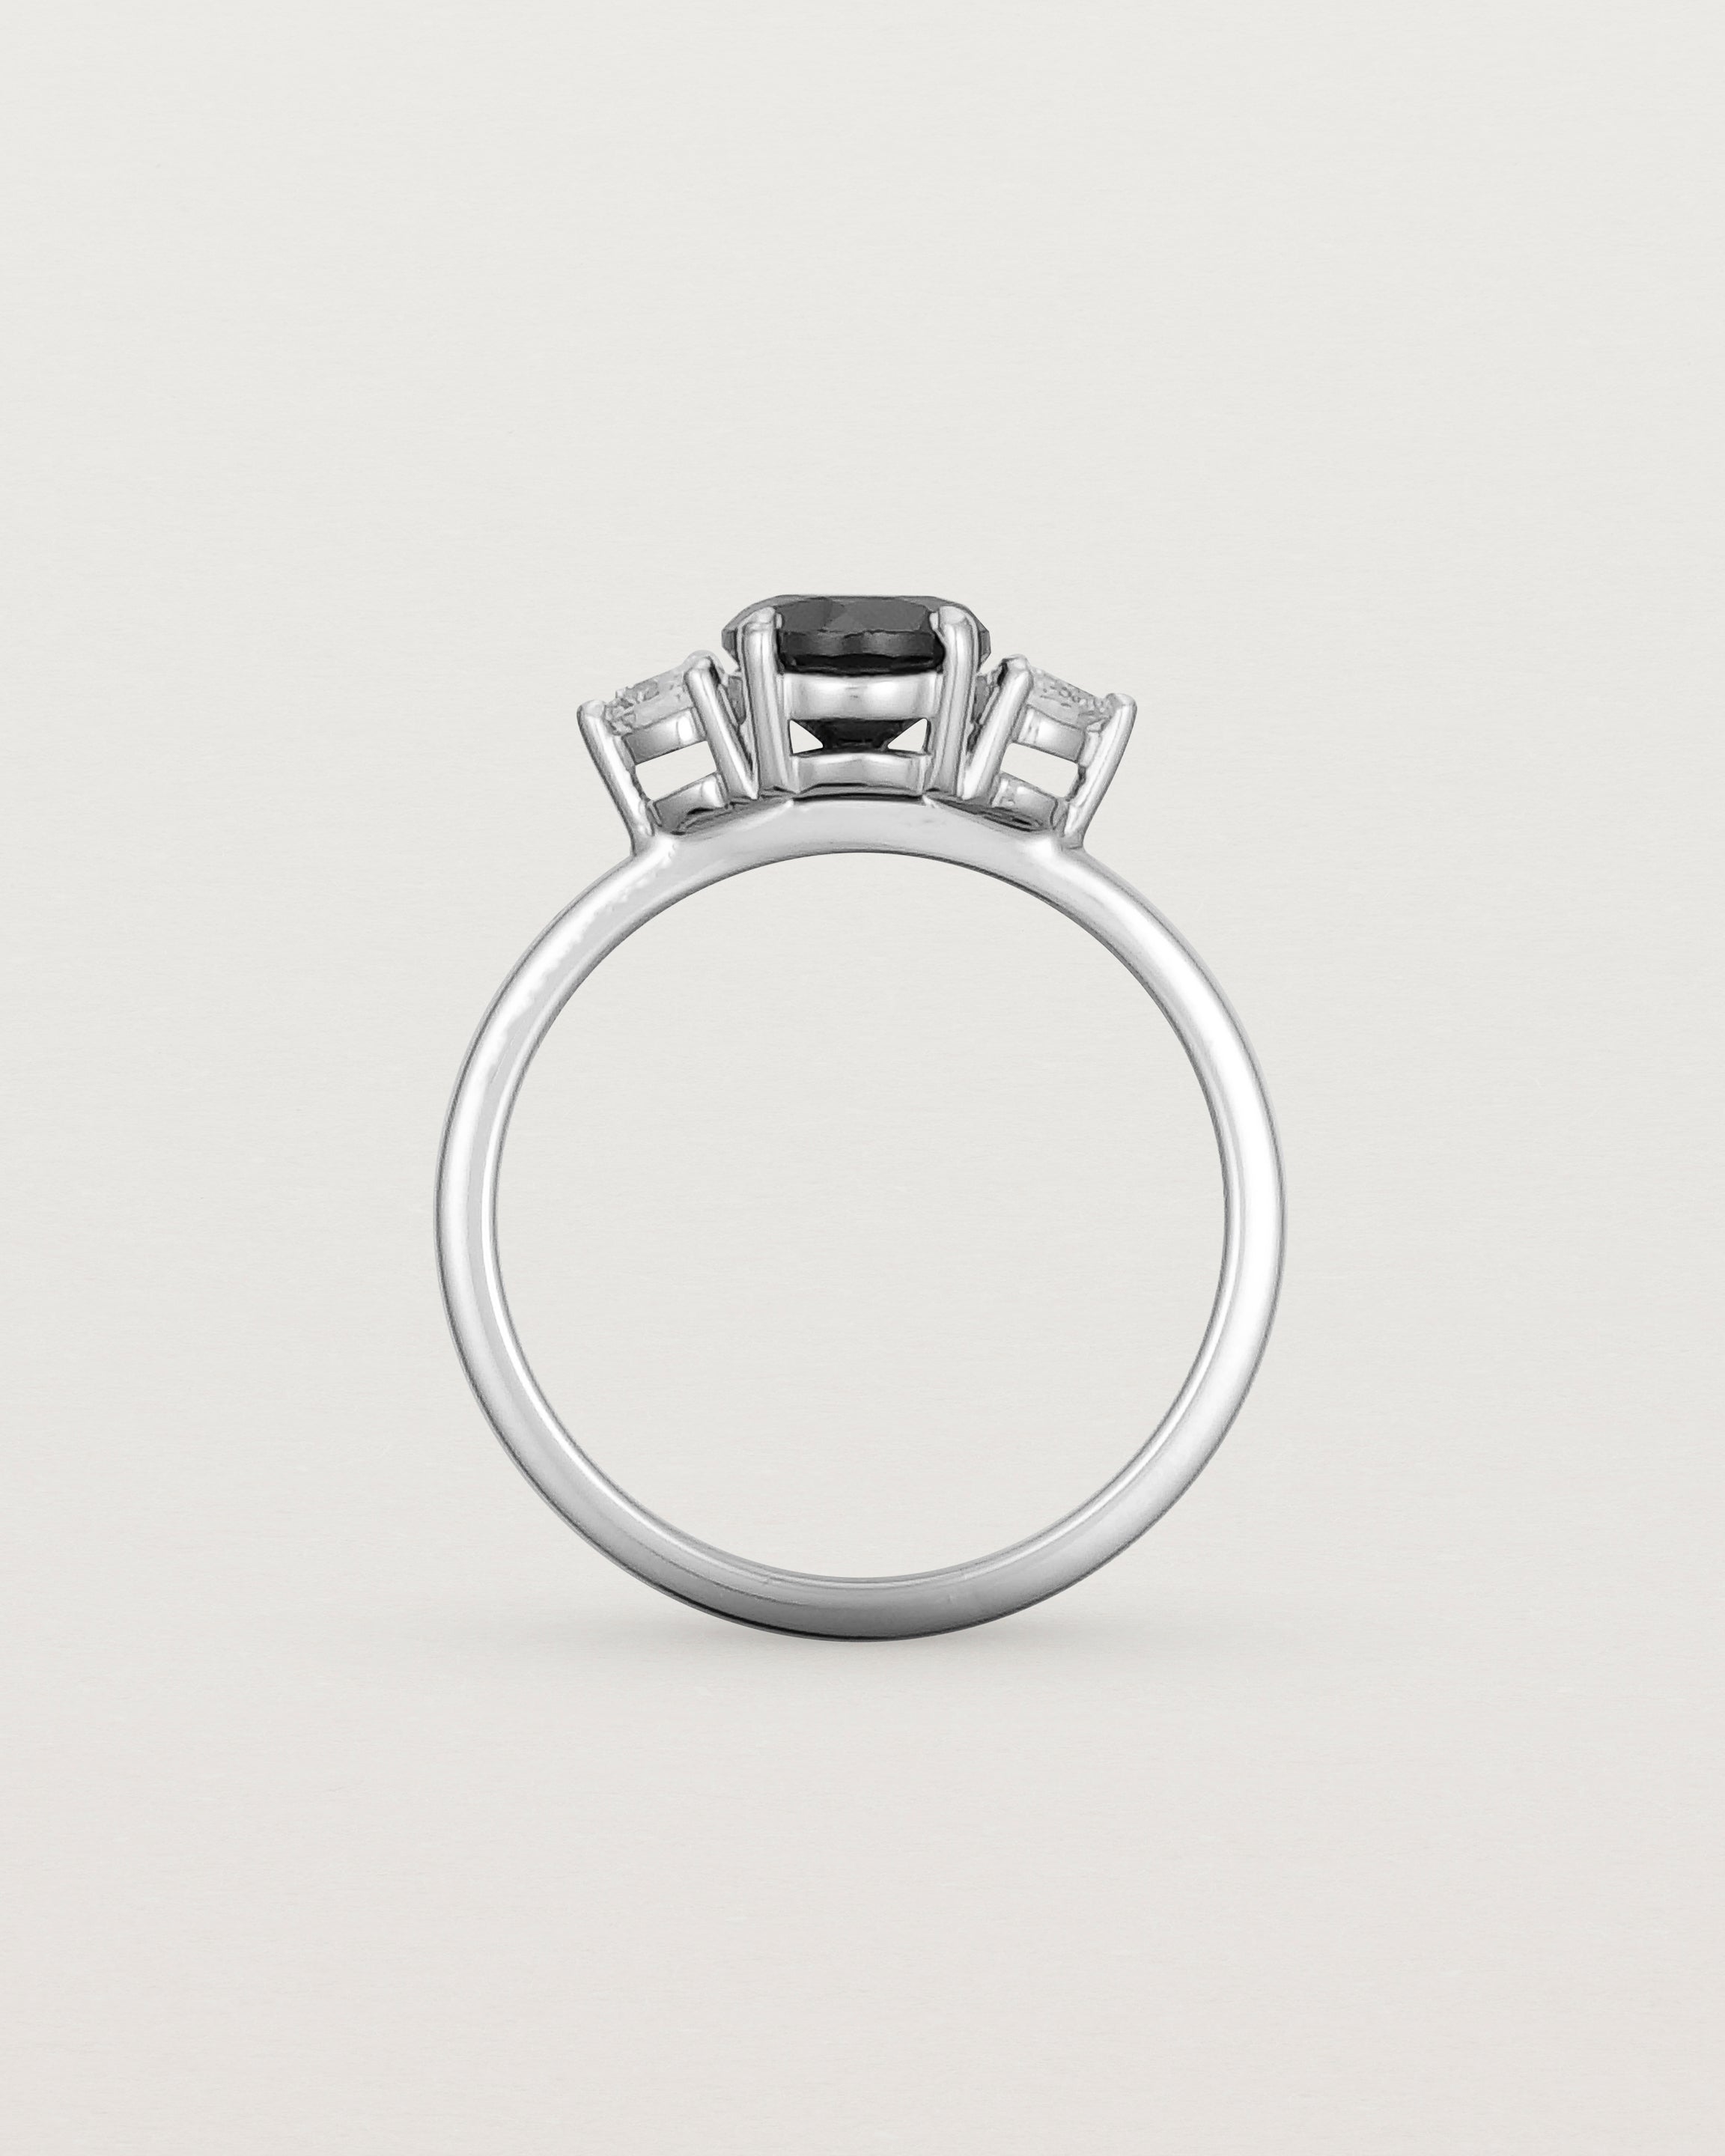 Standing view of the Petite Una Round Trio Ring | Black Spinel & Diamonds | White Gold.